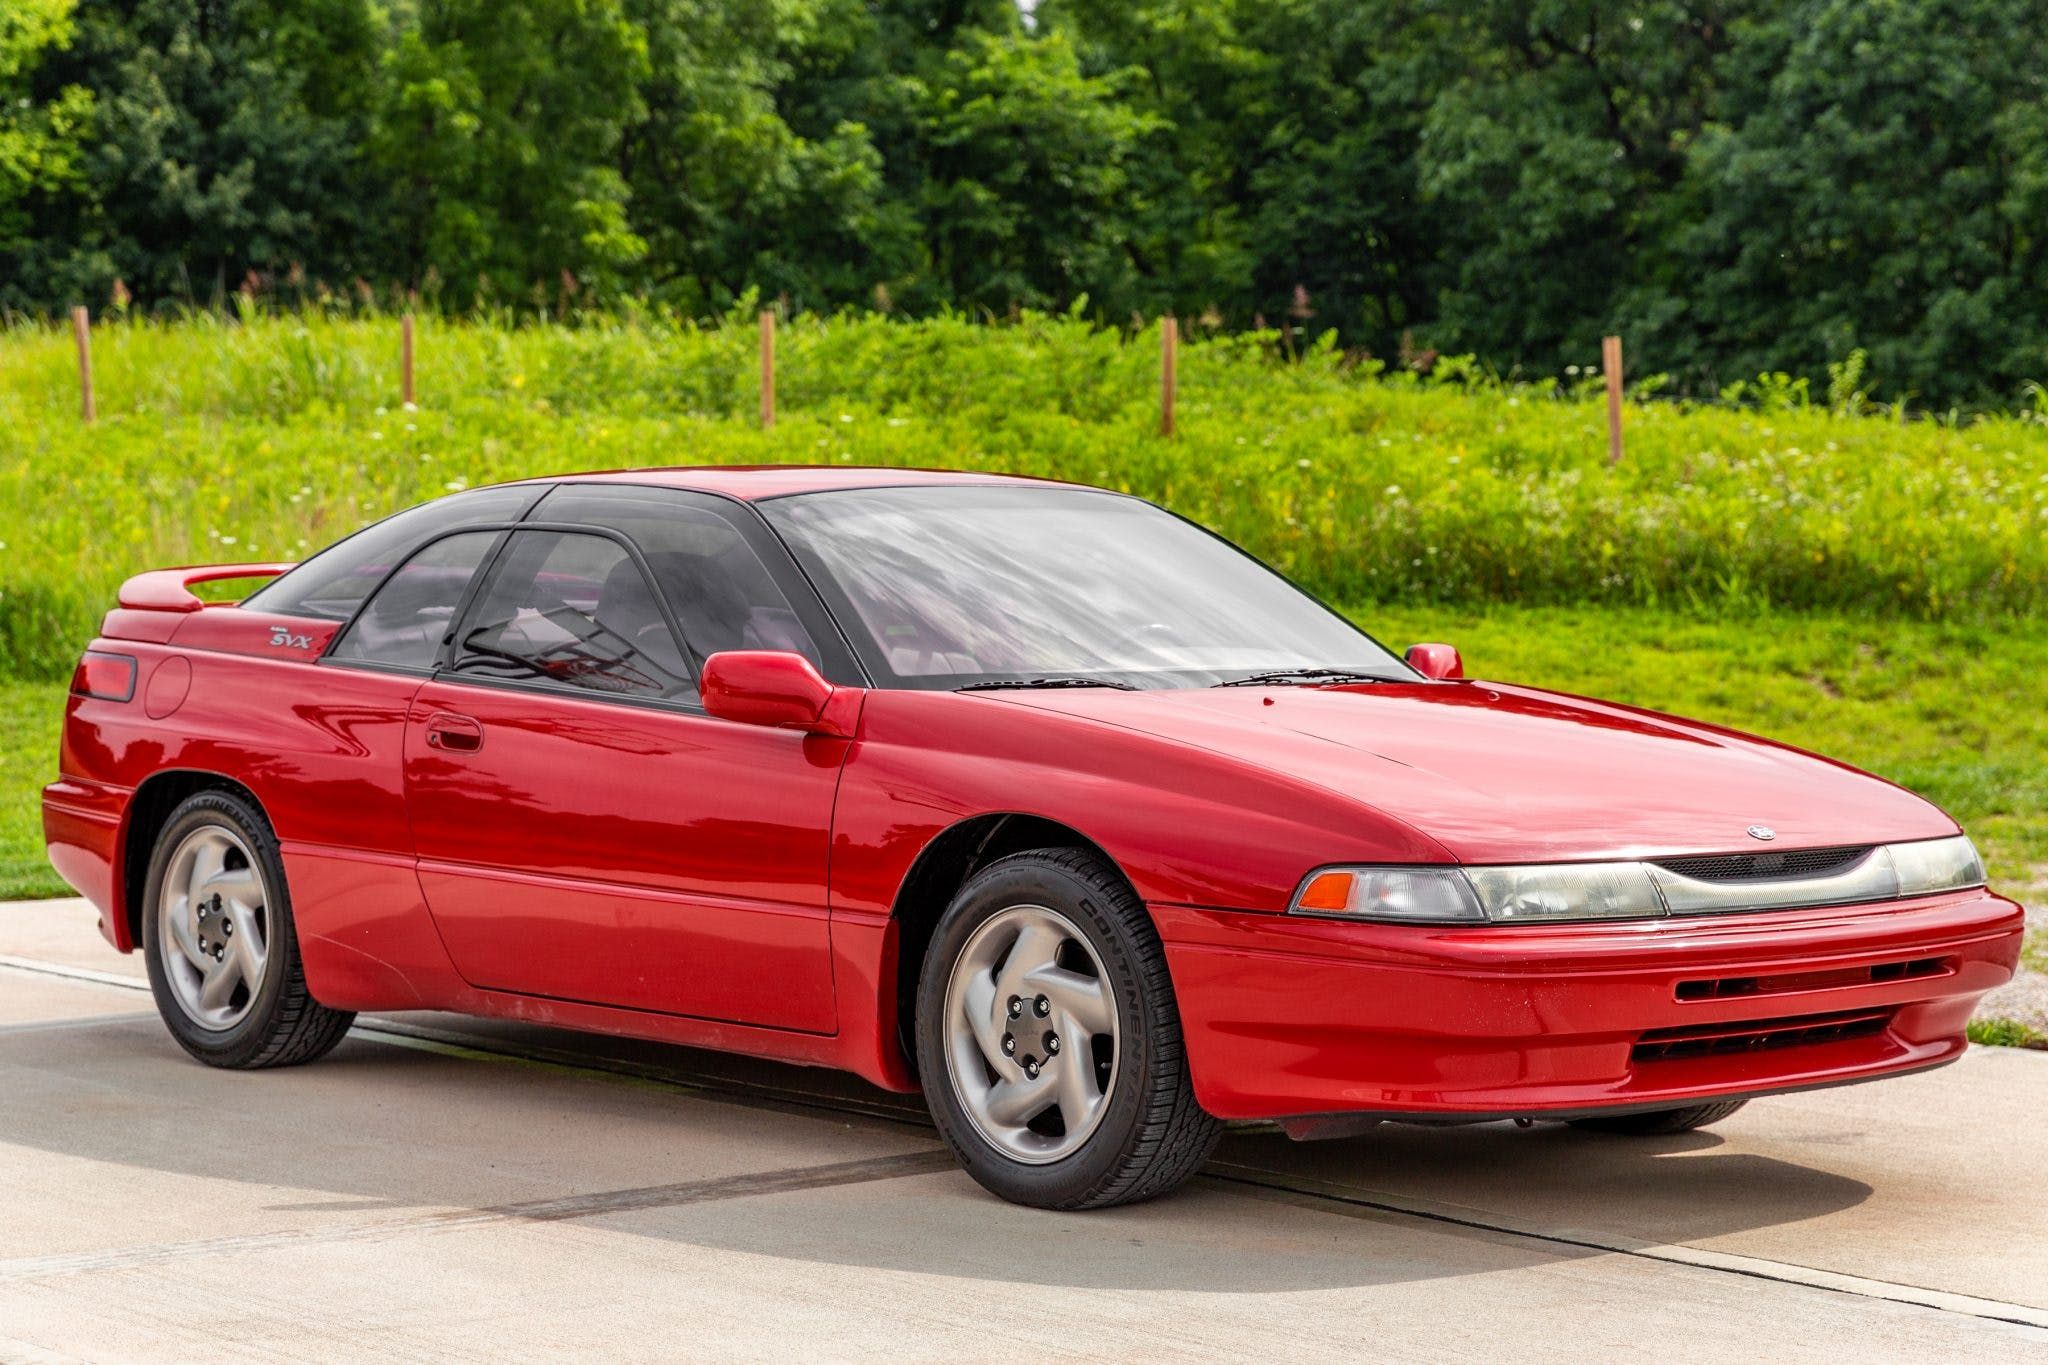 Subaru SVX Front Quarter View In Red